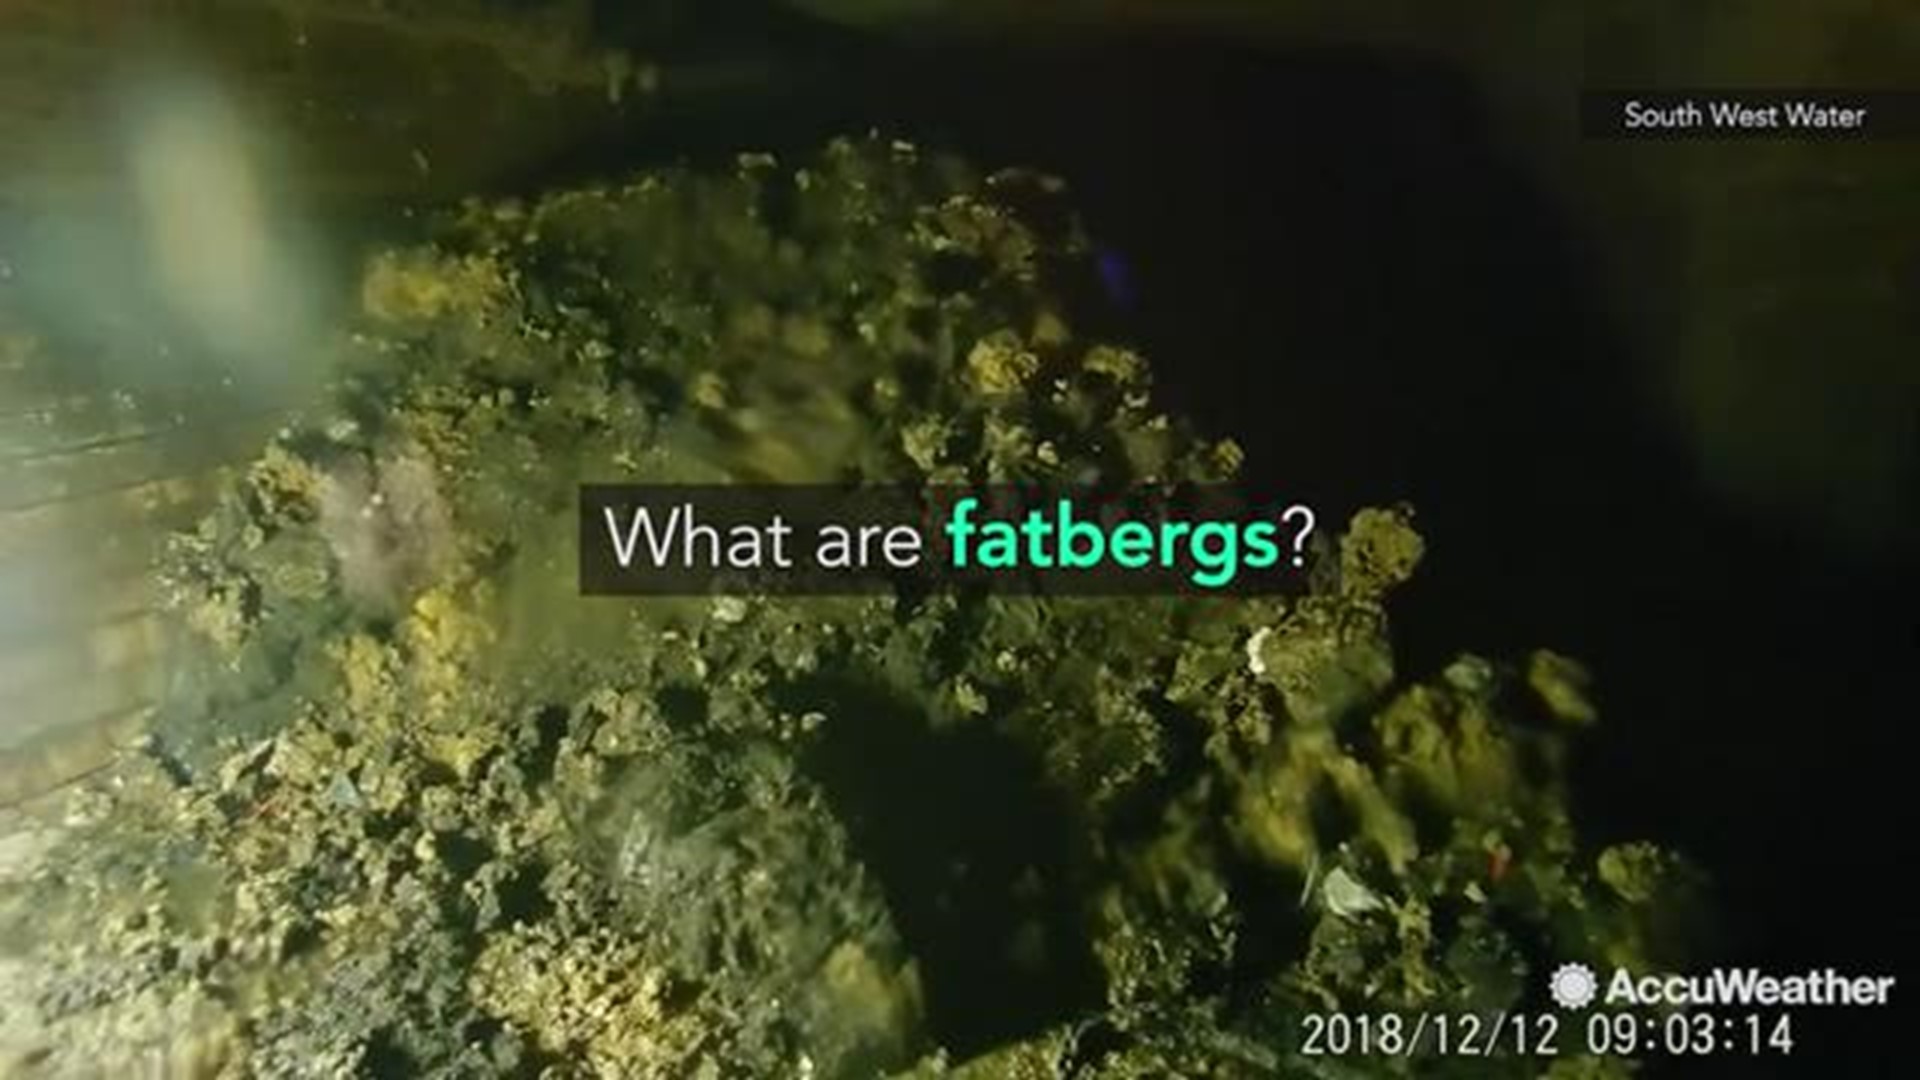 A fatberg forms like a snowball, as grease and waste congeal together in the sewer. When this mass gets large enough, the fatberg can clog sewers entirely.